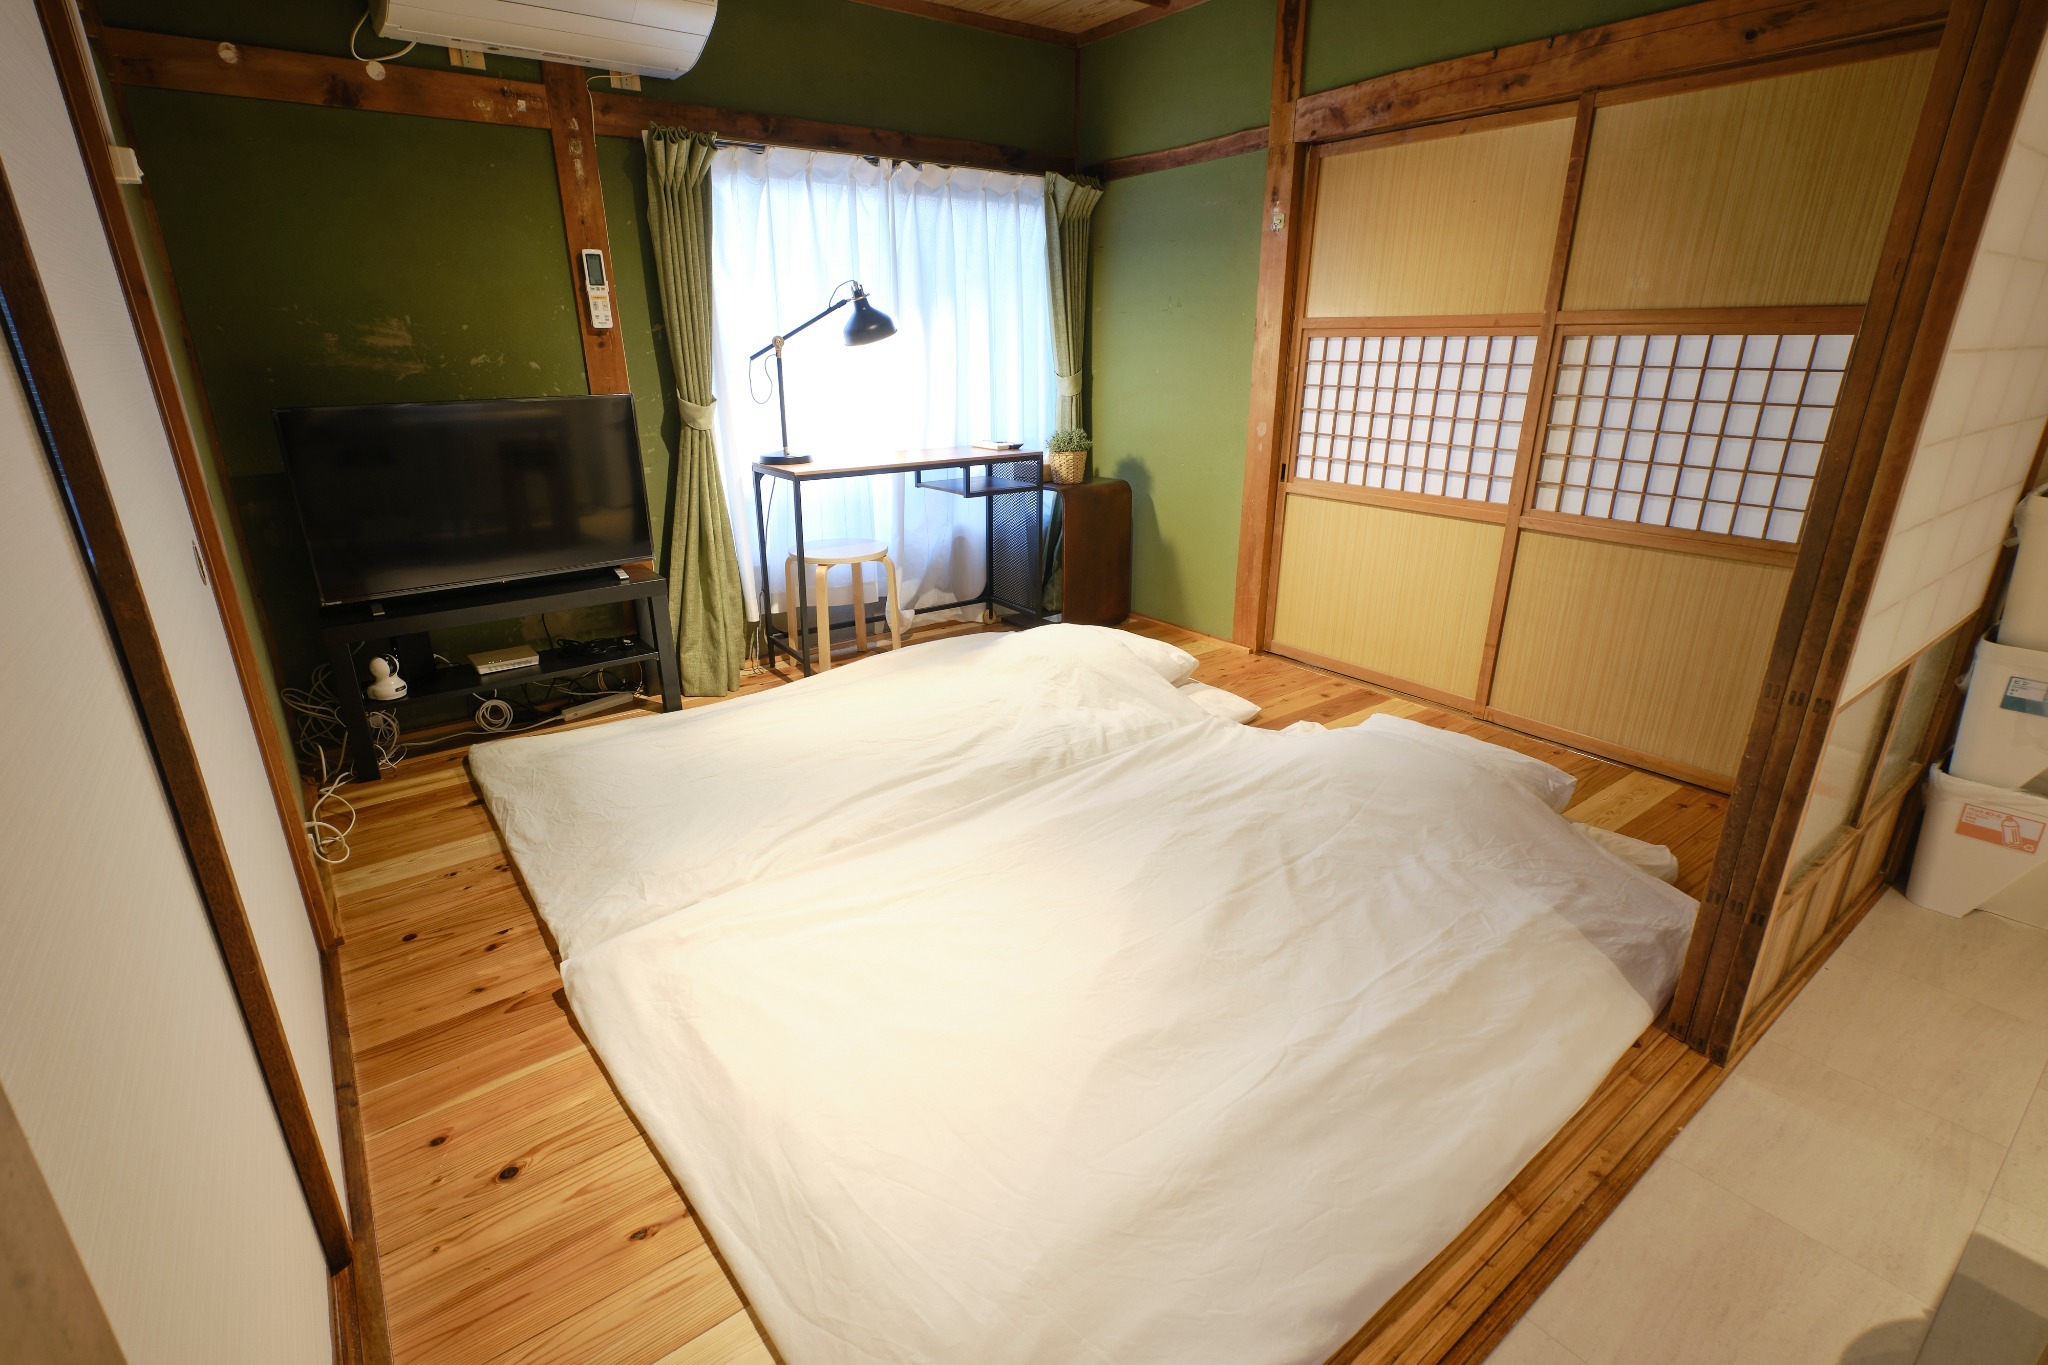 When 5 or 6 people come, please use the living room.56名でお越しの際は、リビングをご利用ください。